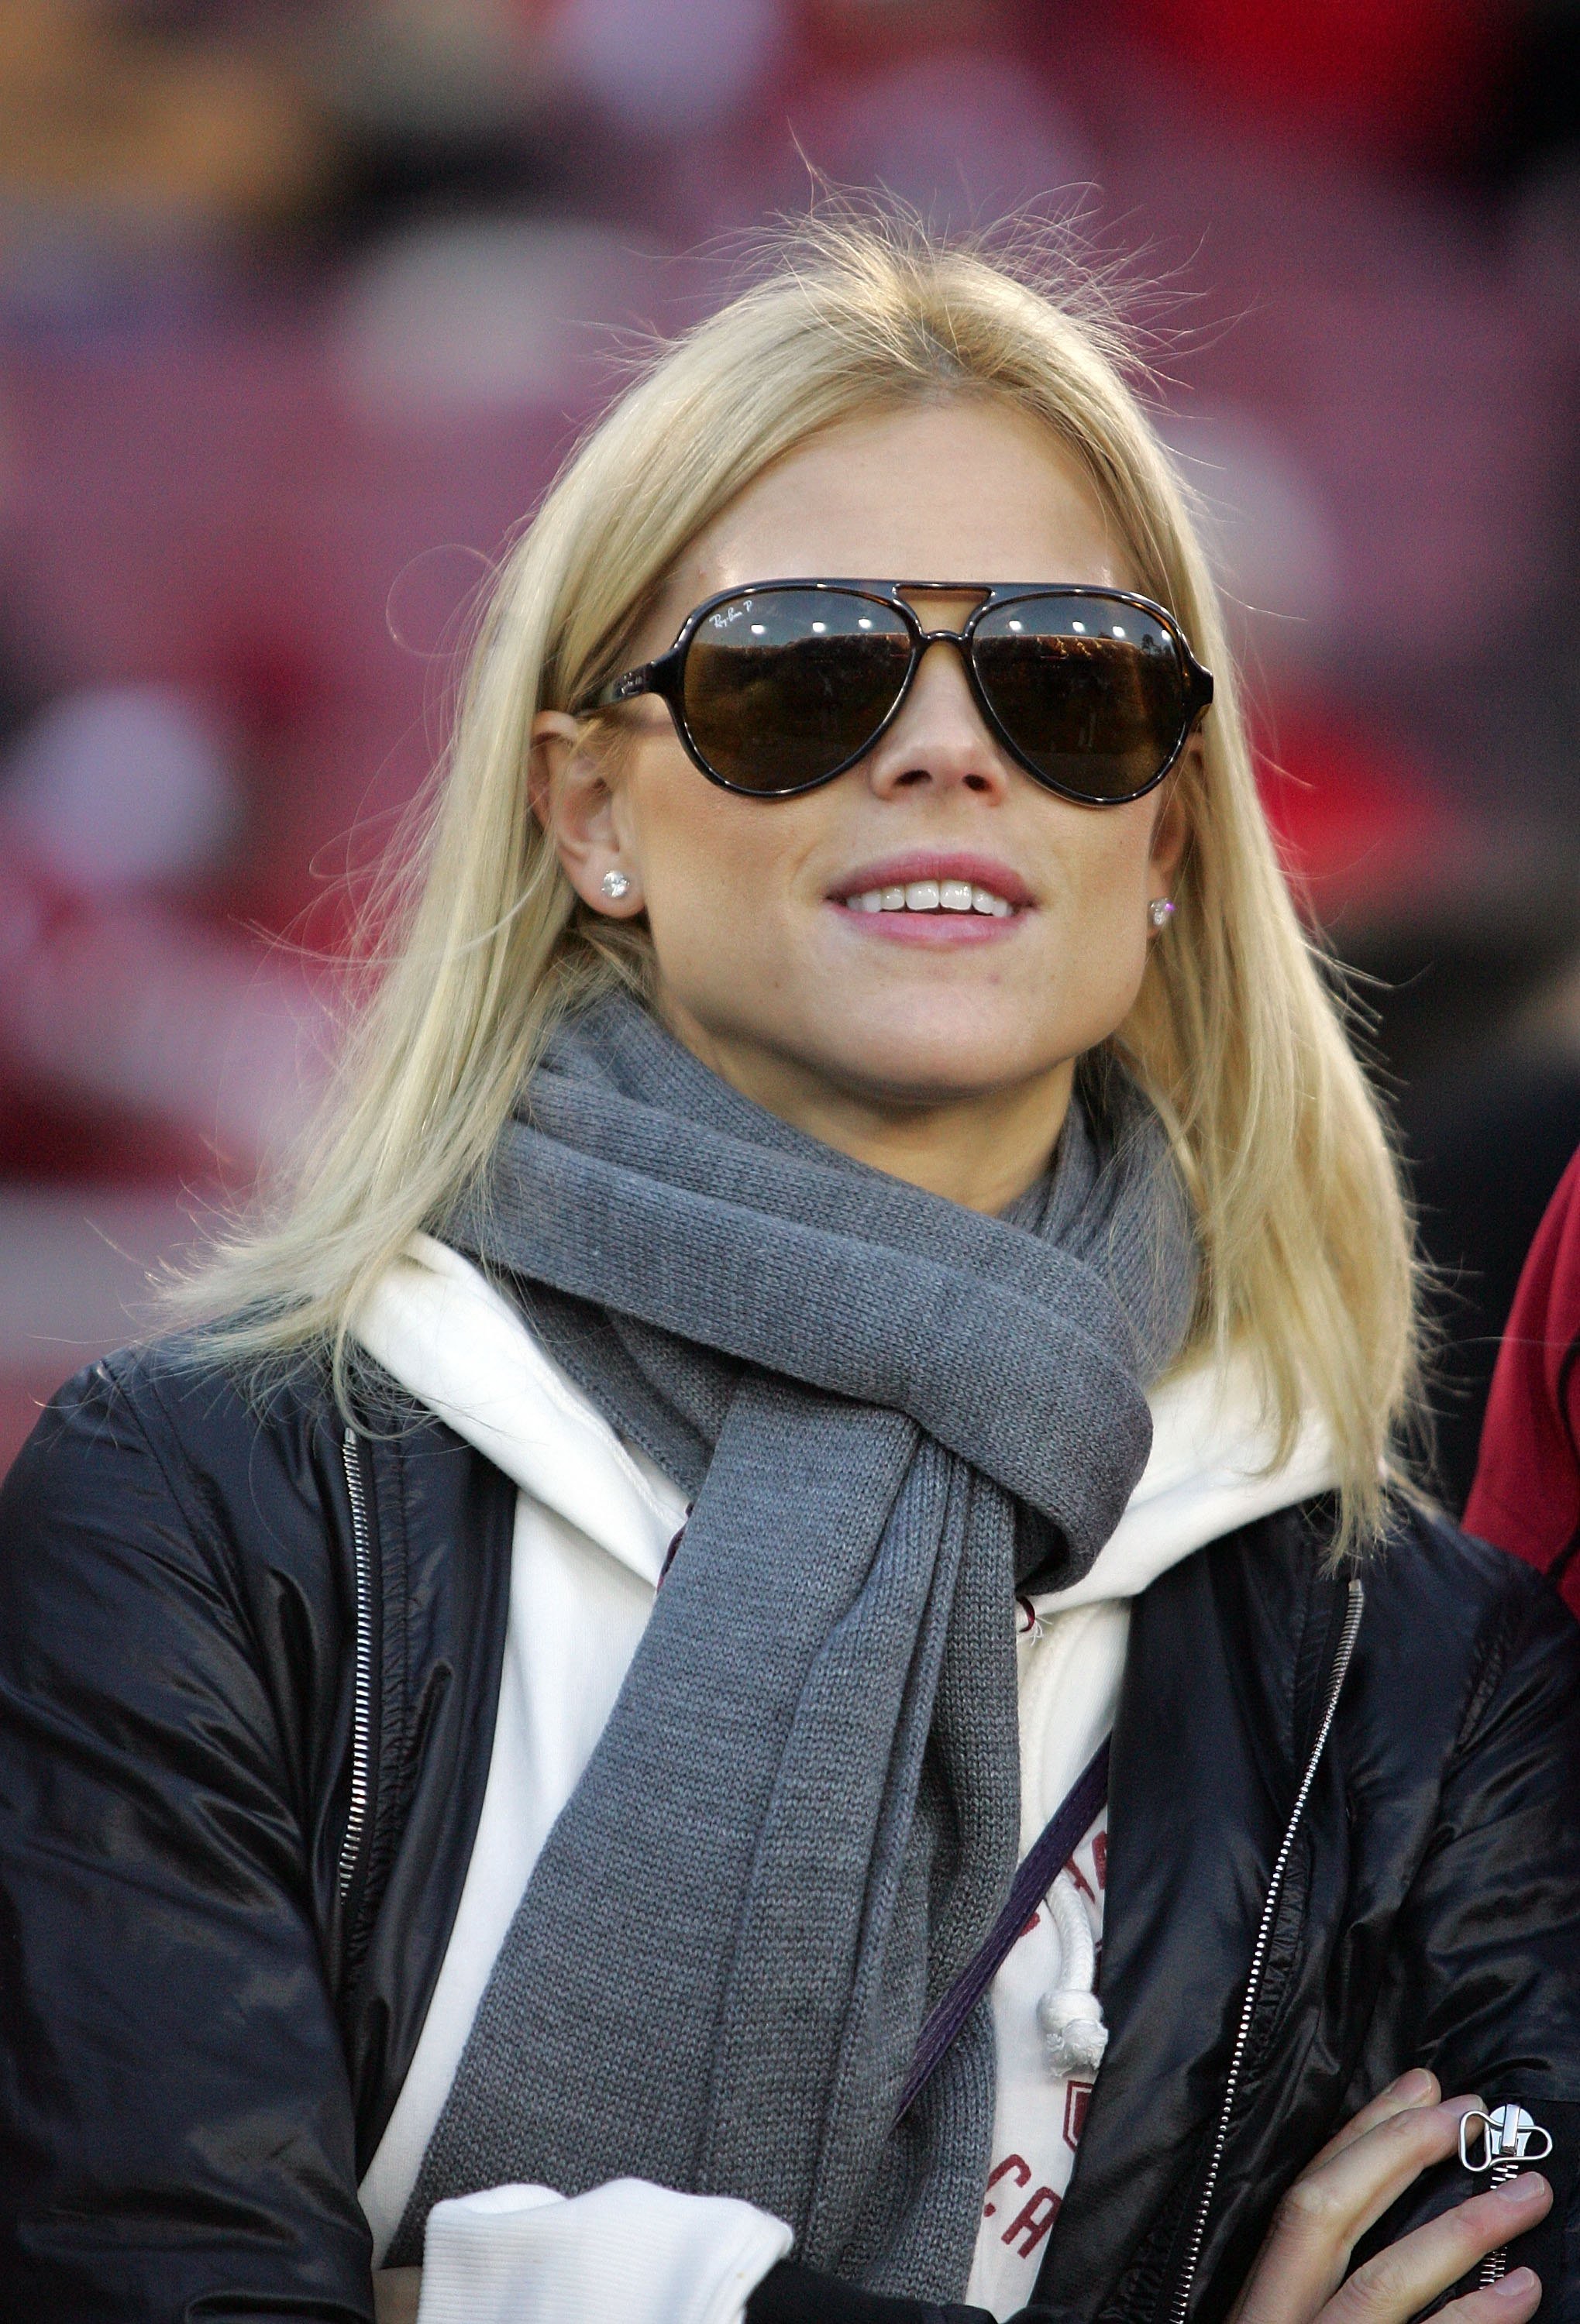 Tiger Woods' ex-wife, Elin Nordegren, on November 21, 2009 in Palo Alto, California | Source: Getty Images